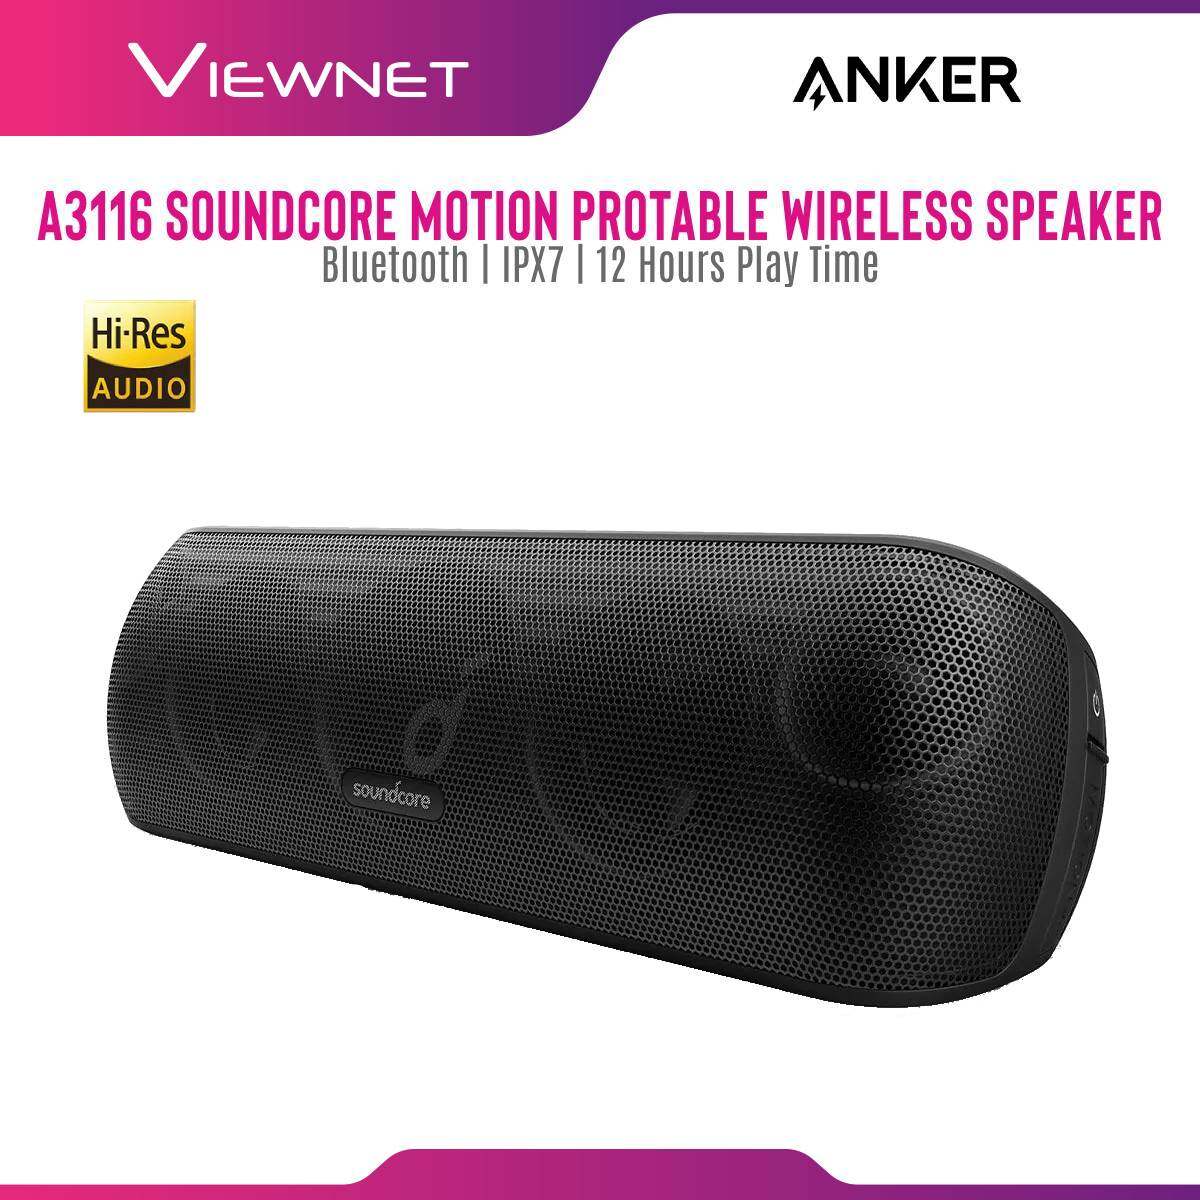 ANKER Speaker Portable Bluetooth A3116 Soundcore Motion  + with Bluetooth 5.0, IPX 7, Wireless Stereo Pairing, BassUpâ„¢ Technology, Pure Audio Power